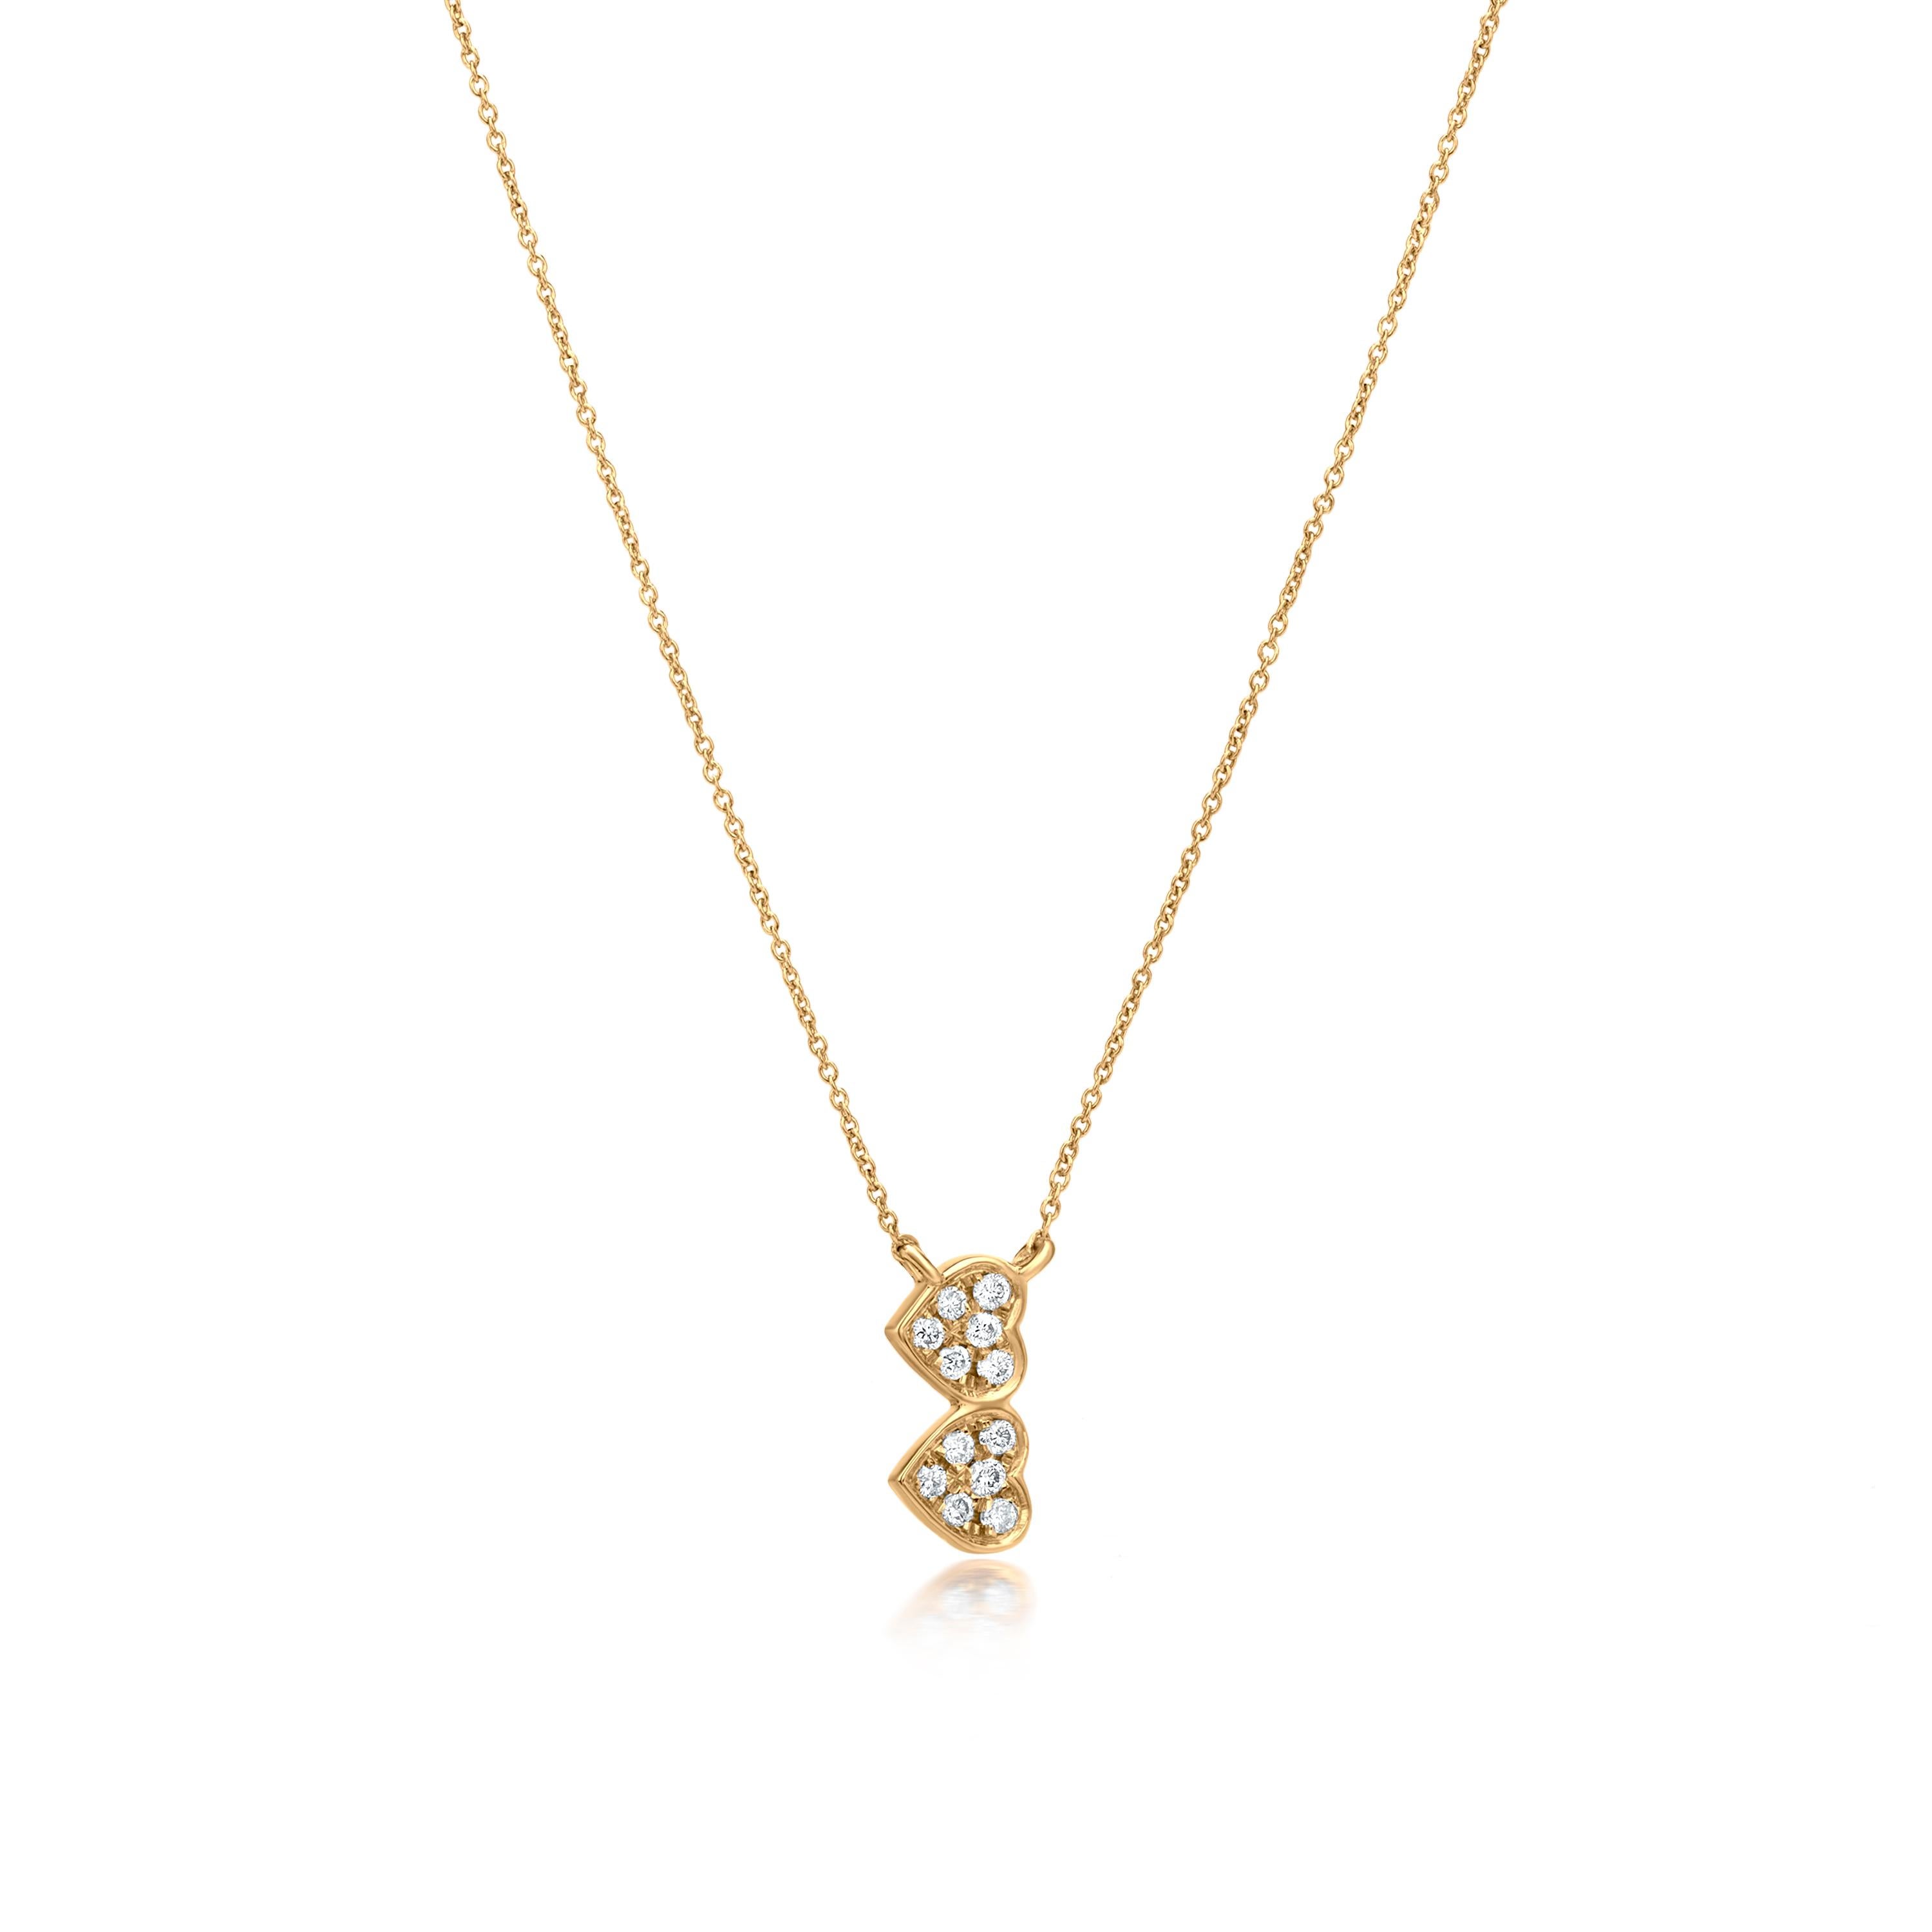 Grace your neckline with a Luxle double heart pendant it signifies intertwined hearts or joined in circles,                   a never-ending love. Subtle yet pretty this double heart pendant necklace is the new fashion statement.  This necklace is